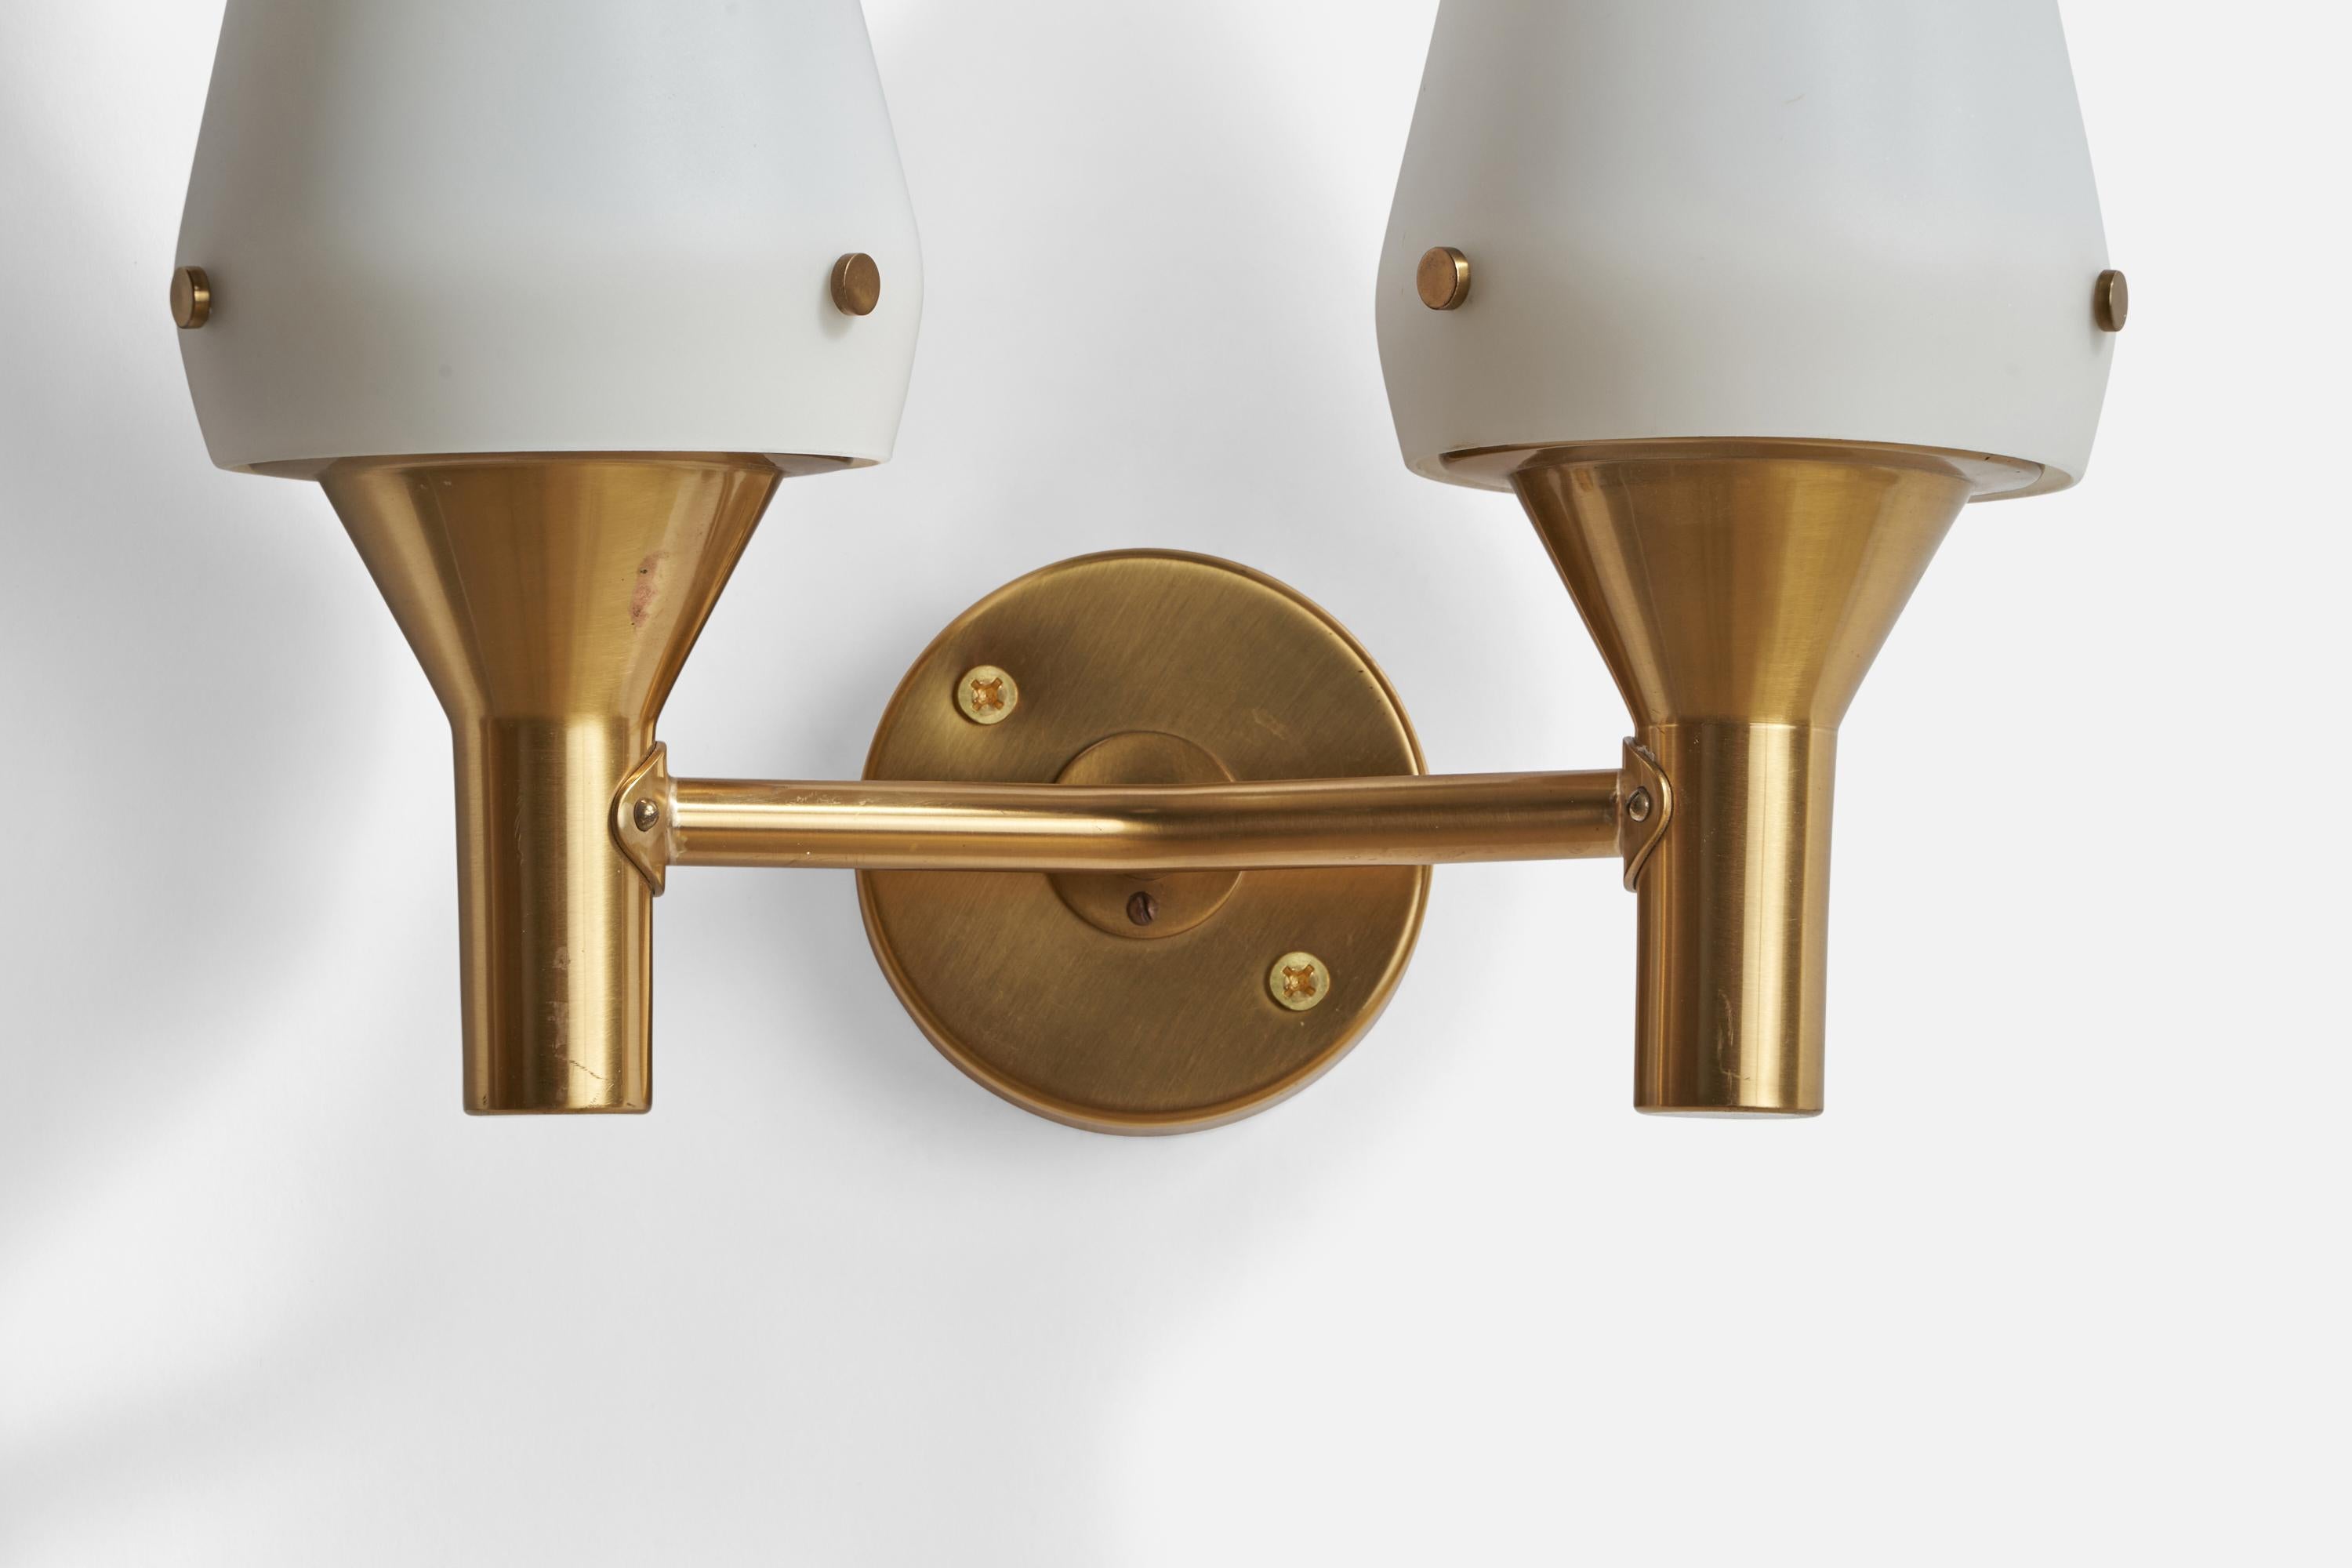 A two-armed brass and opaline glass wall light designed and produced by Hans-Agne Jakobsson, Markaryd, Sweden, 1960s.

Overall Dimensions (inches): 13” H x 13” W x 6.9” D
Back Plate Dimensions (inches): 4.25” Diameter x 1.75” Depth
Bulb